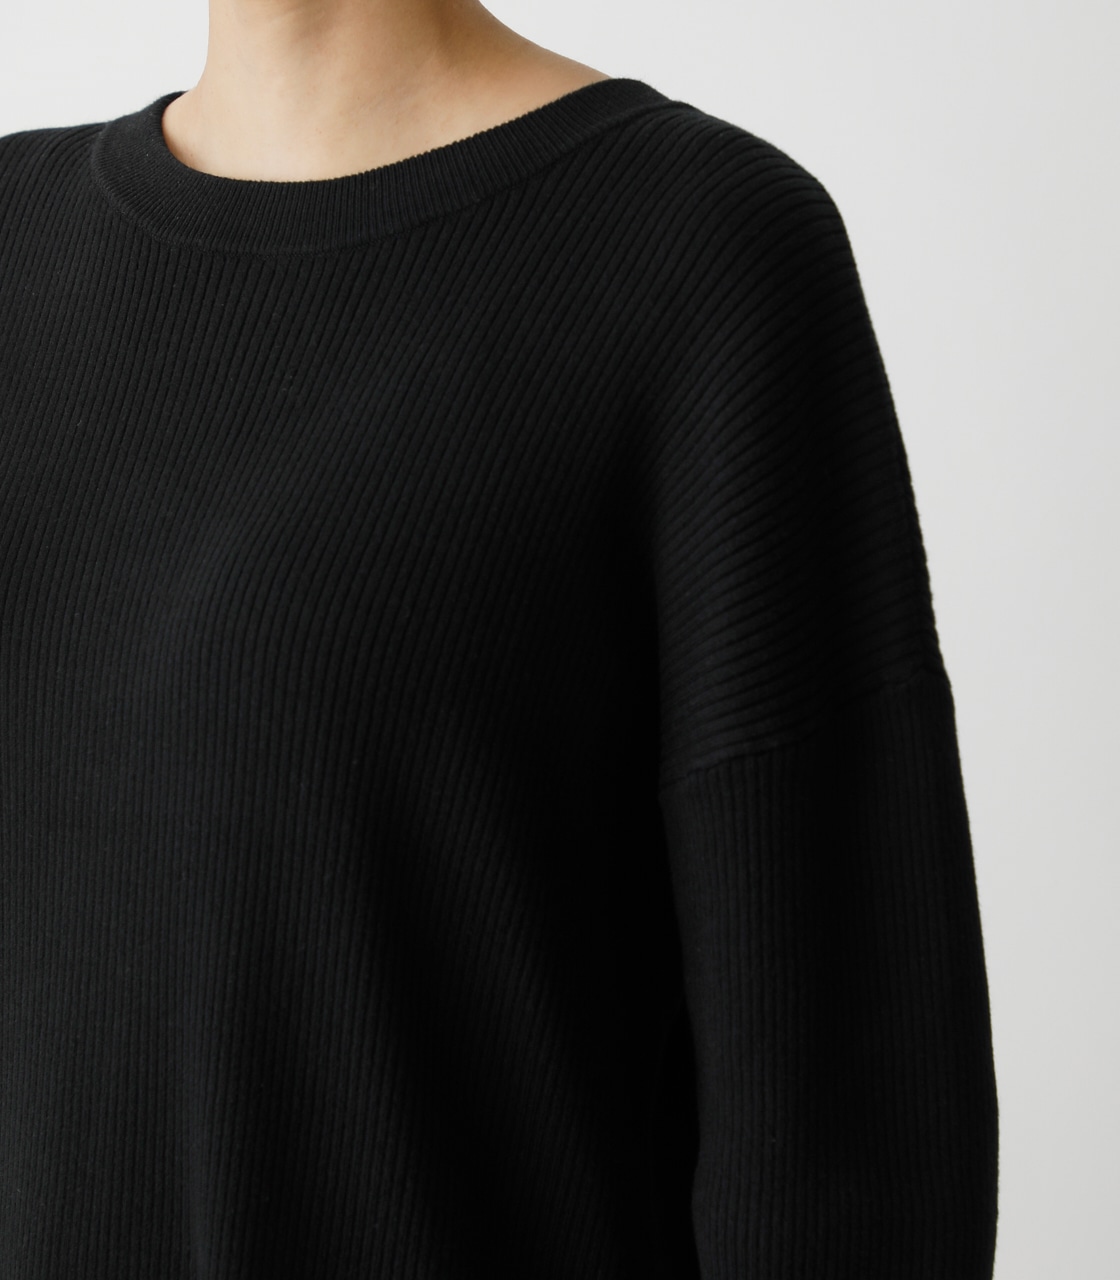 2WAY RIB KNIT LONG TOPS/2WAYリブニットロングトップス 詳細画像 BLK 8